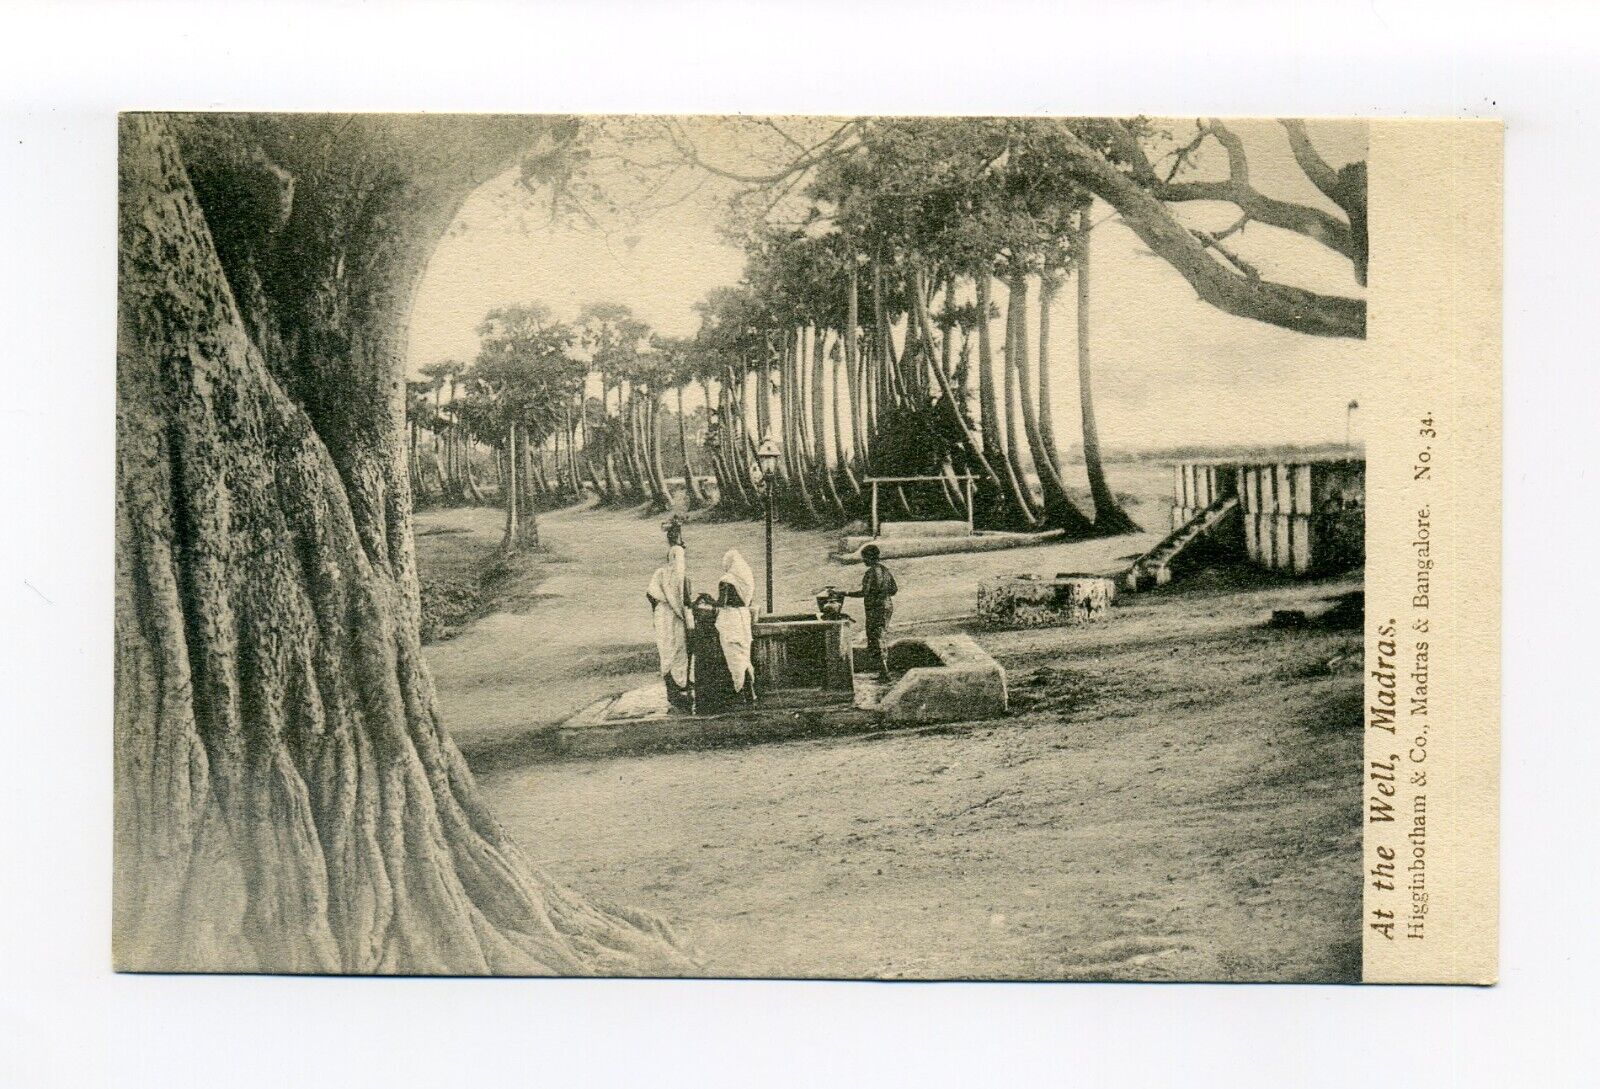 India, Chennai postcard, people at the well, tree lined street